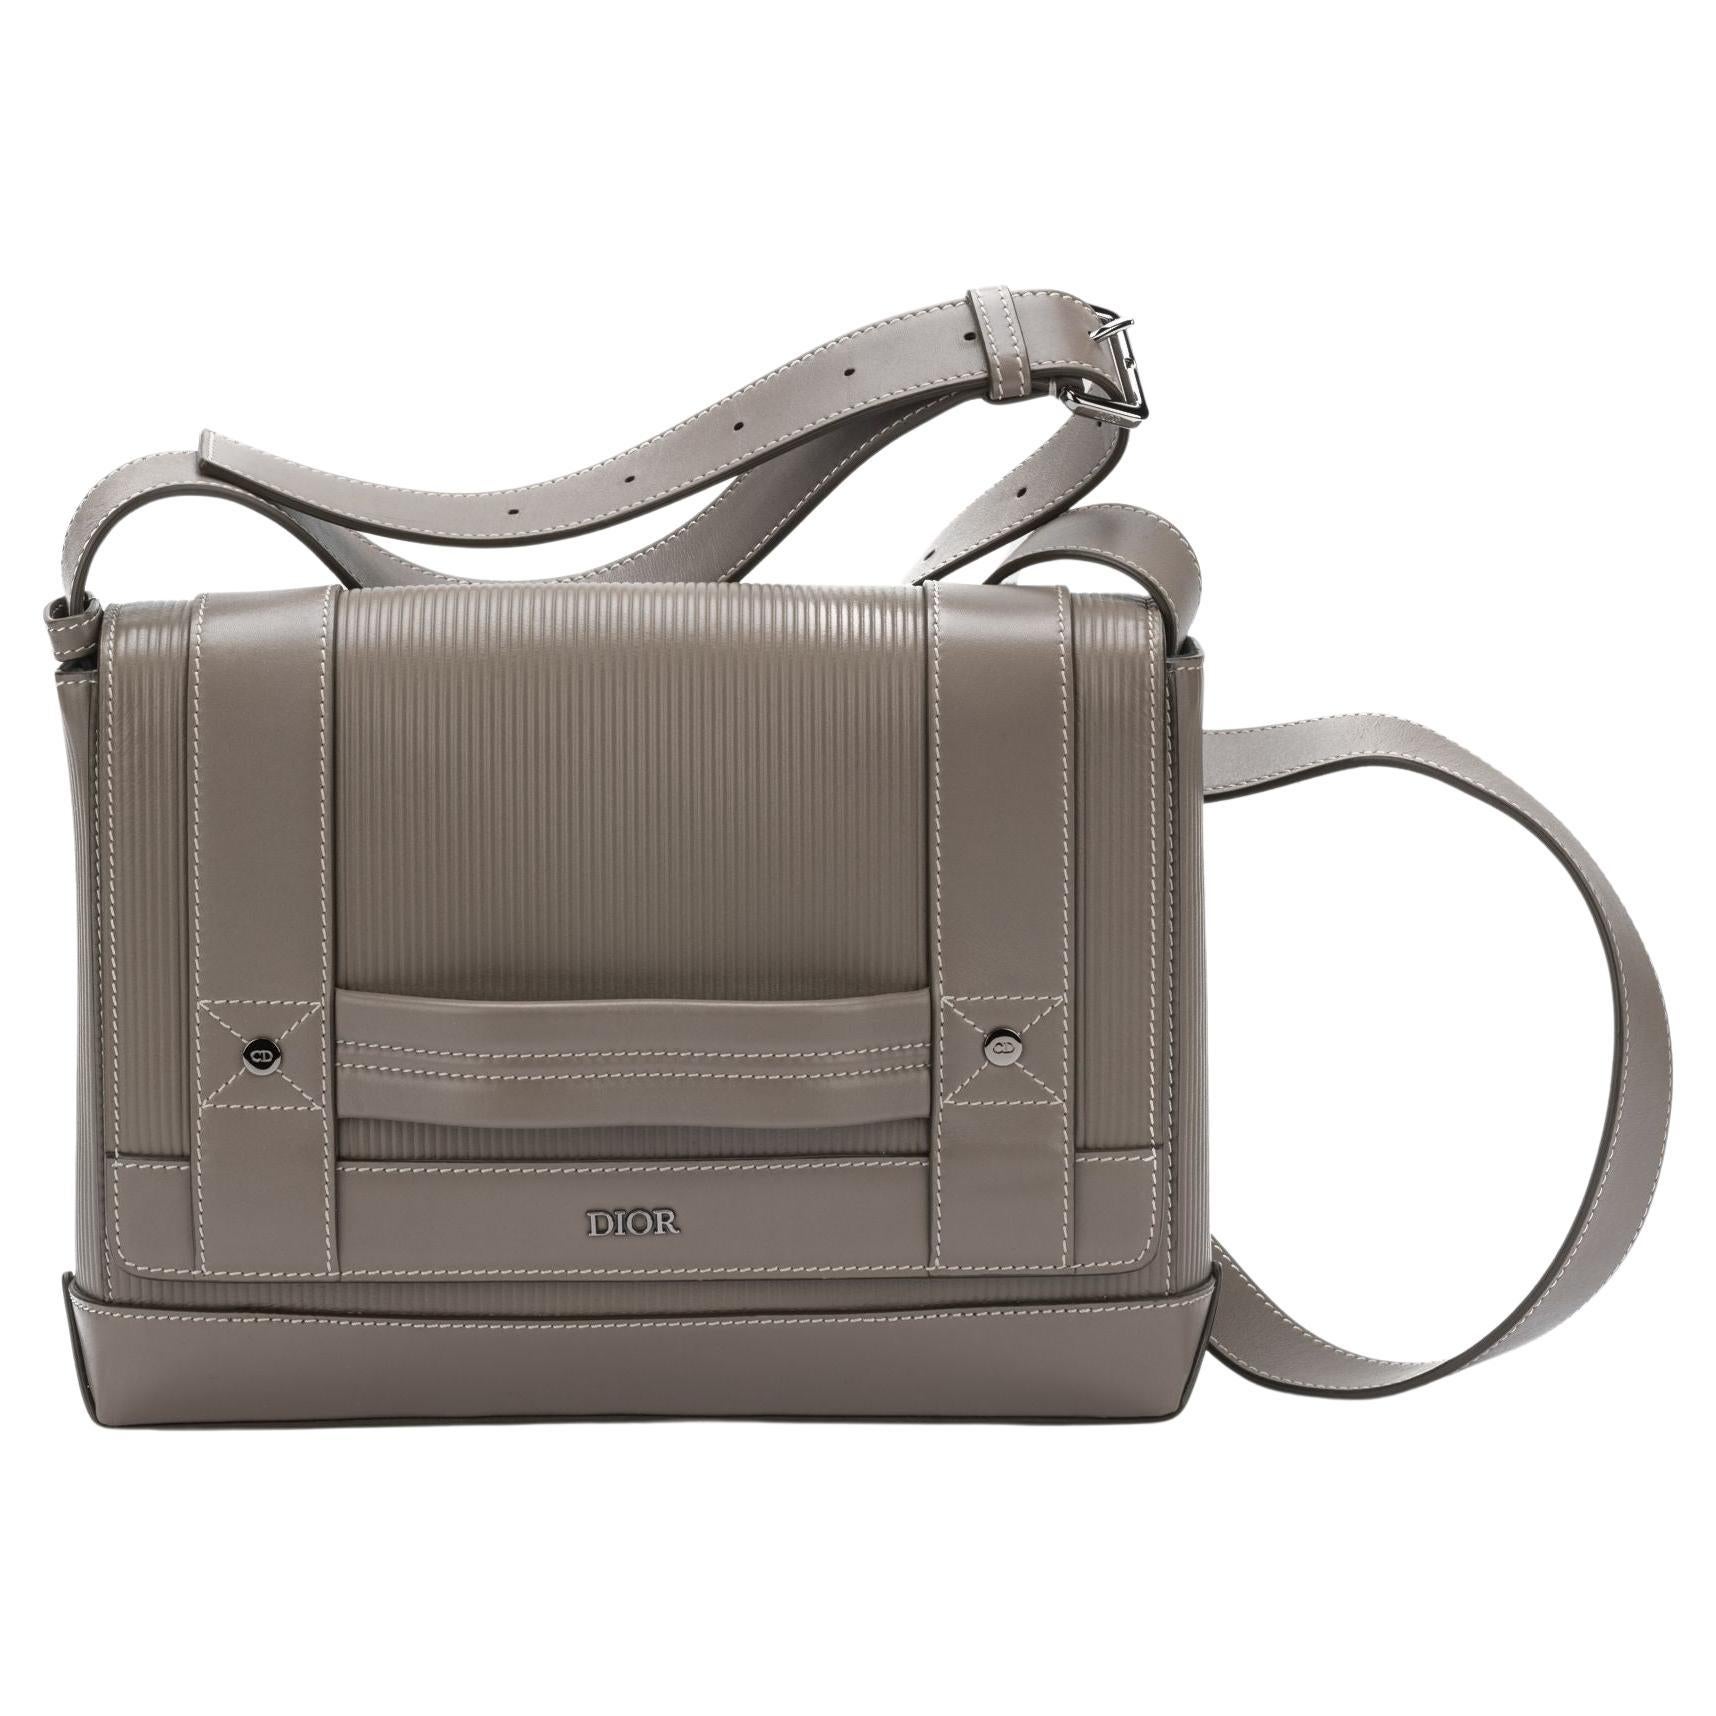 Dior New Messenger Bag in Taupe For Sale